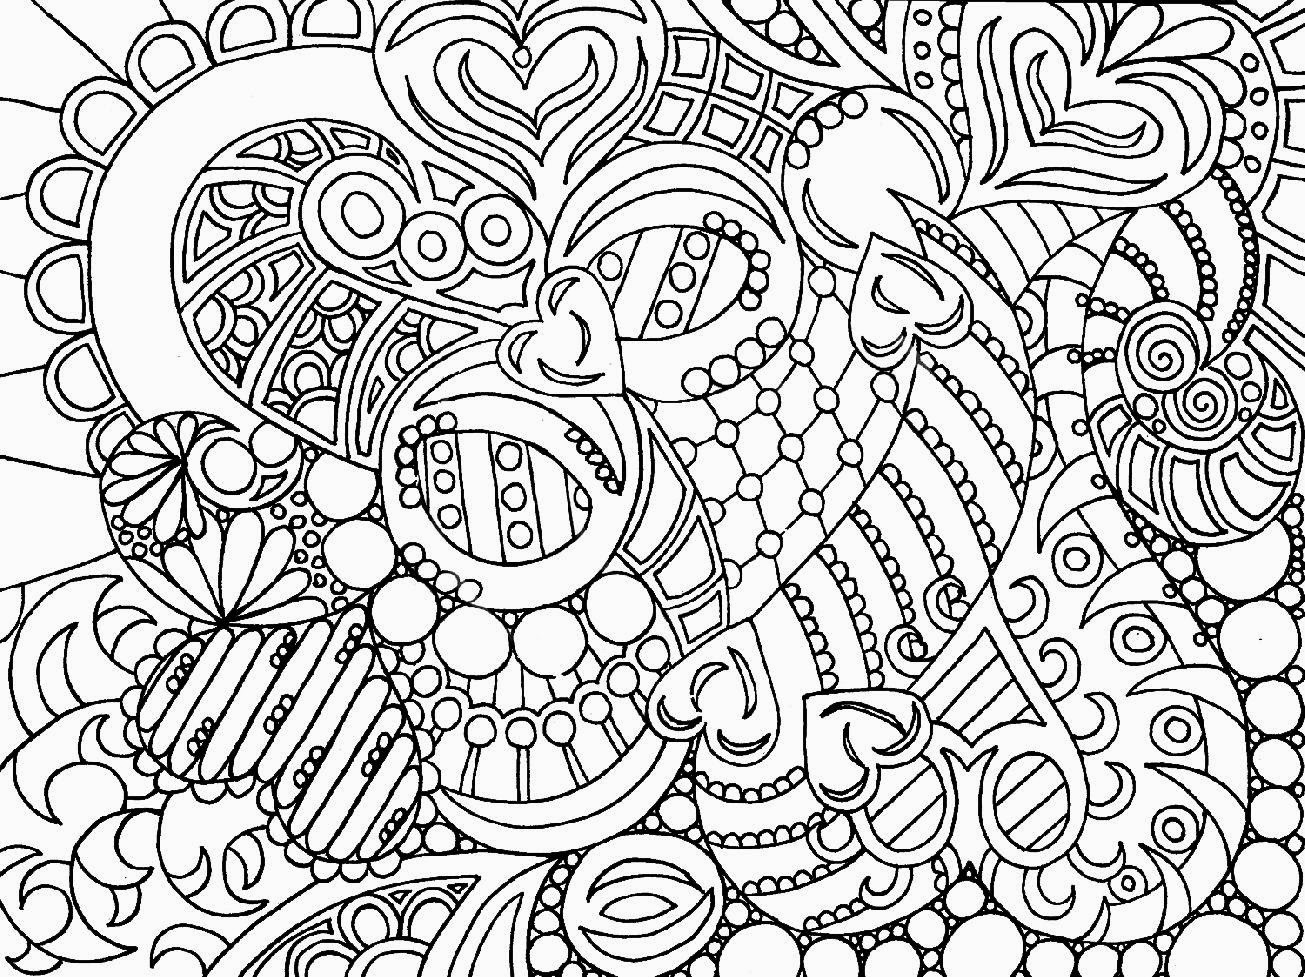 Adult Coloring Sheets Free Coloring Sheet BEDECOR Free Coloring Picture wallpaper give a chance to color on the wall without getting in trouble! Fill the walls of your home or office with stress-relieving [bedroomdecorz.blogspot.com]